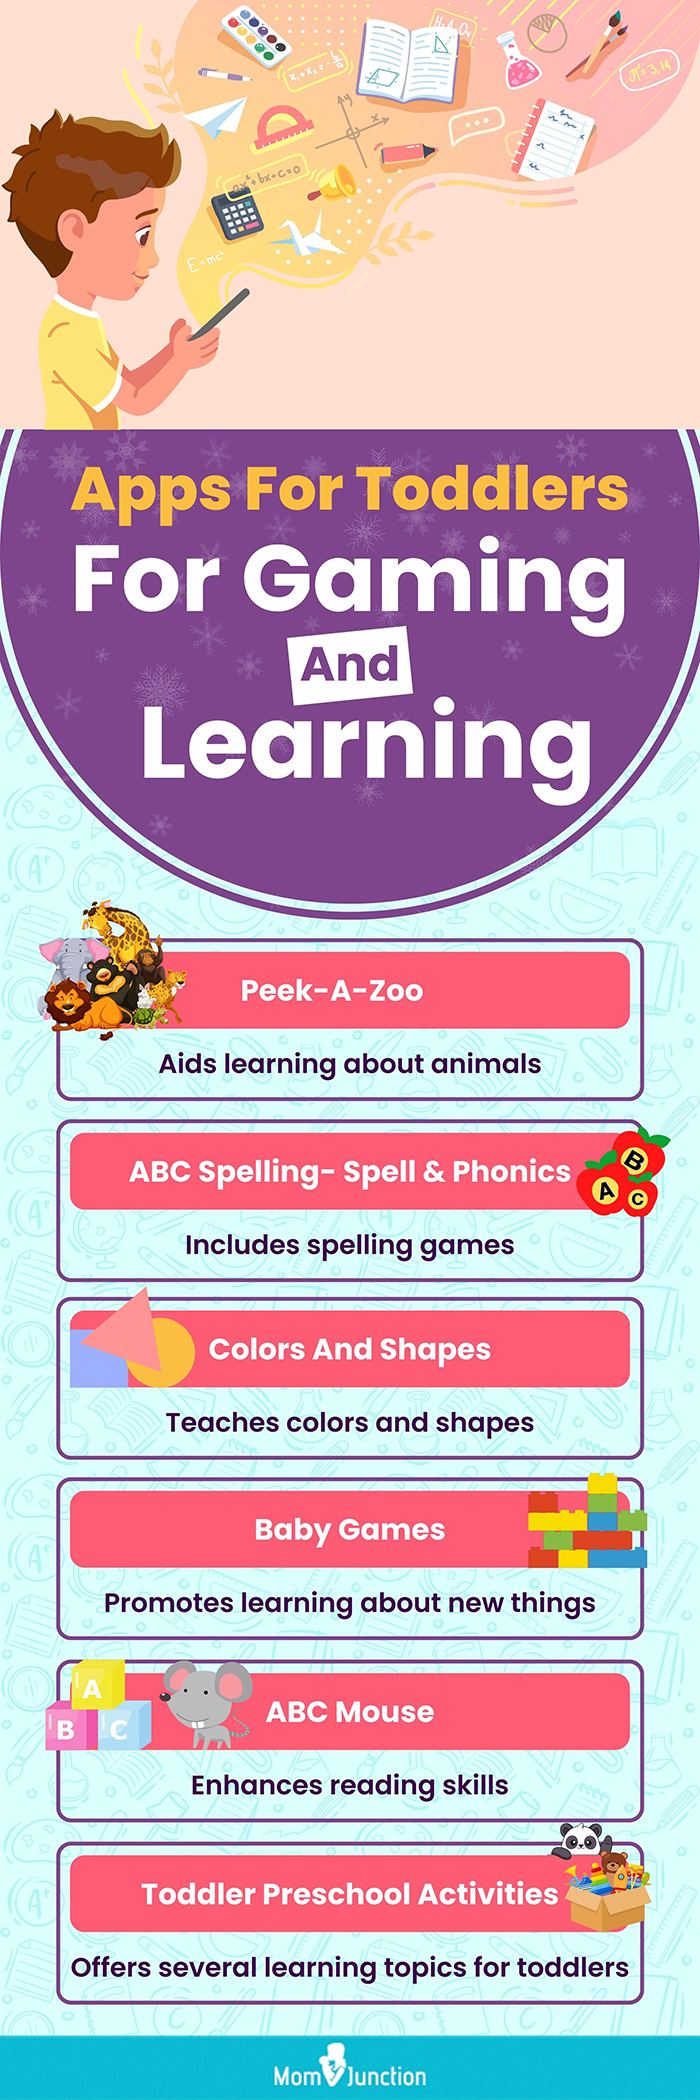 apps for toddlers for gaming and learning [infographic]